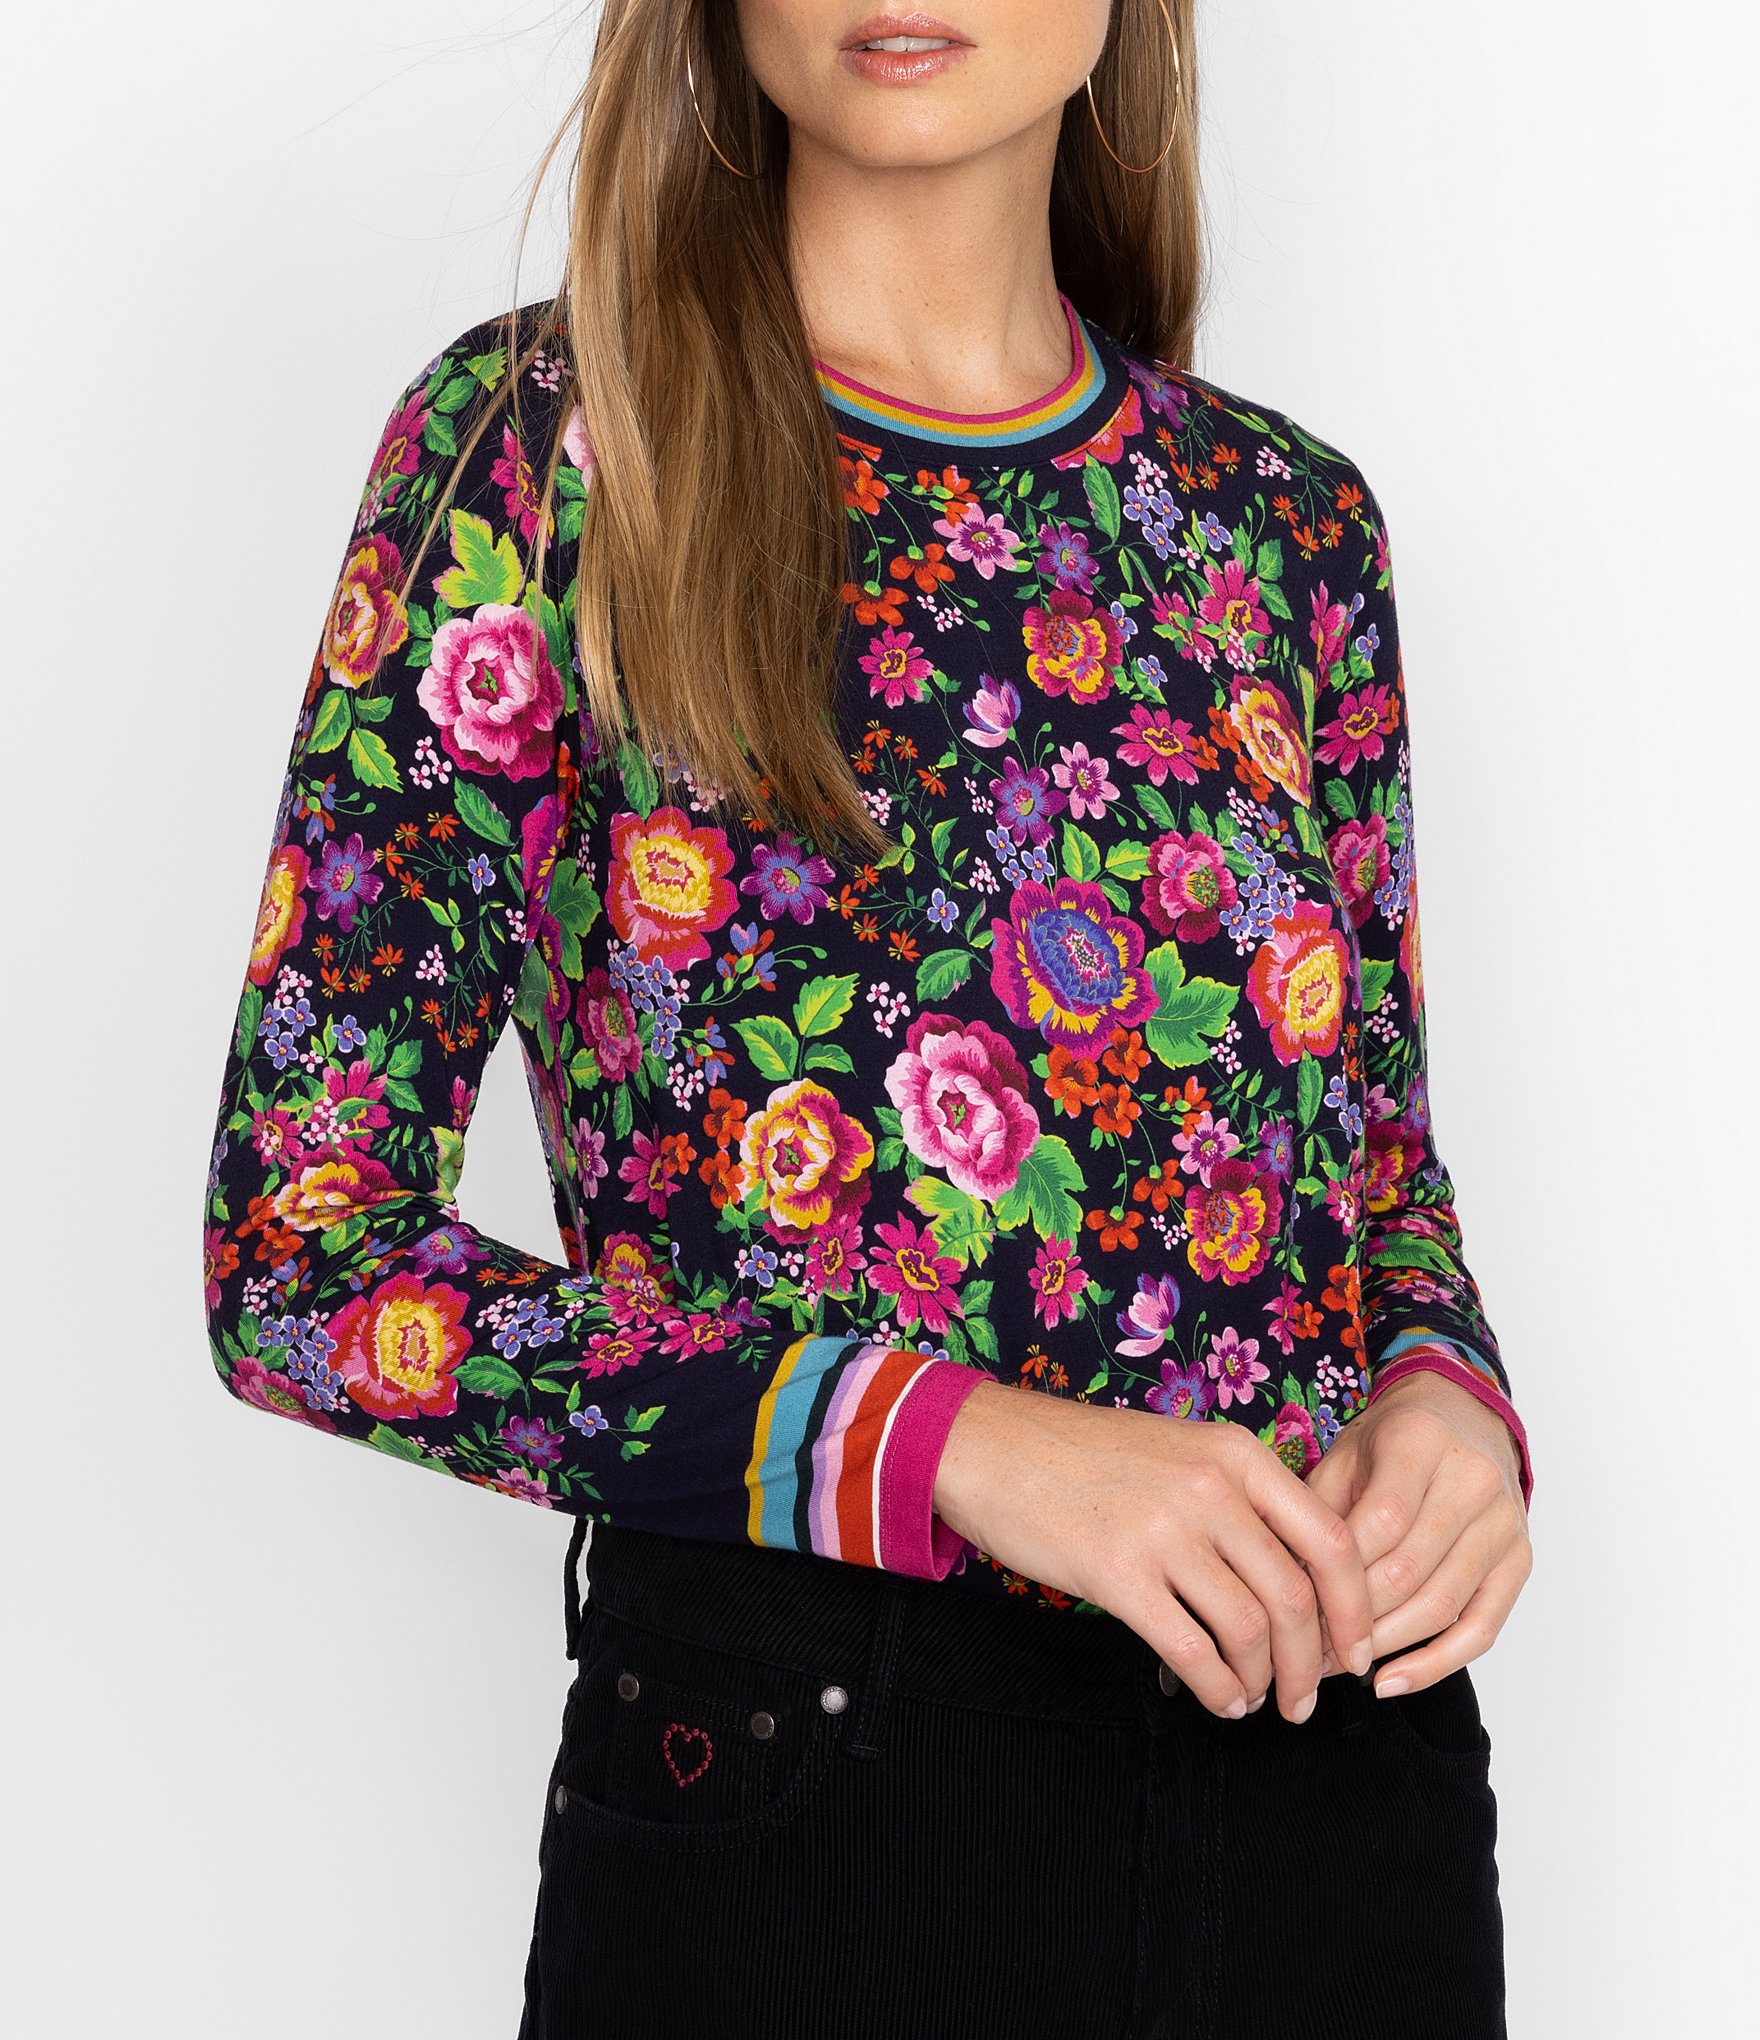 floral top: Women's Clothing